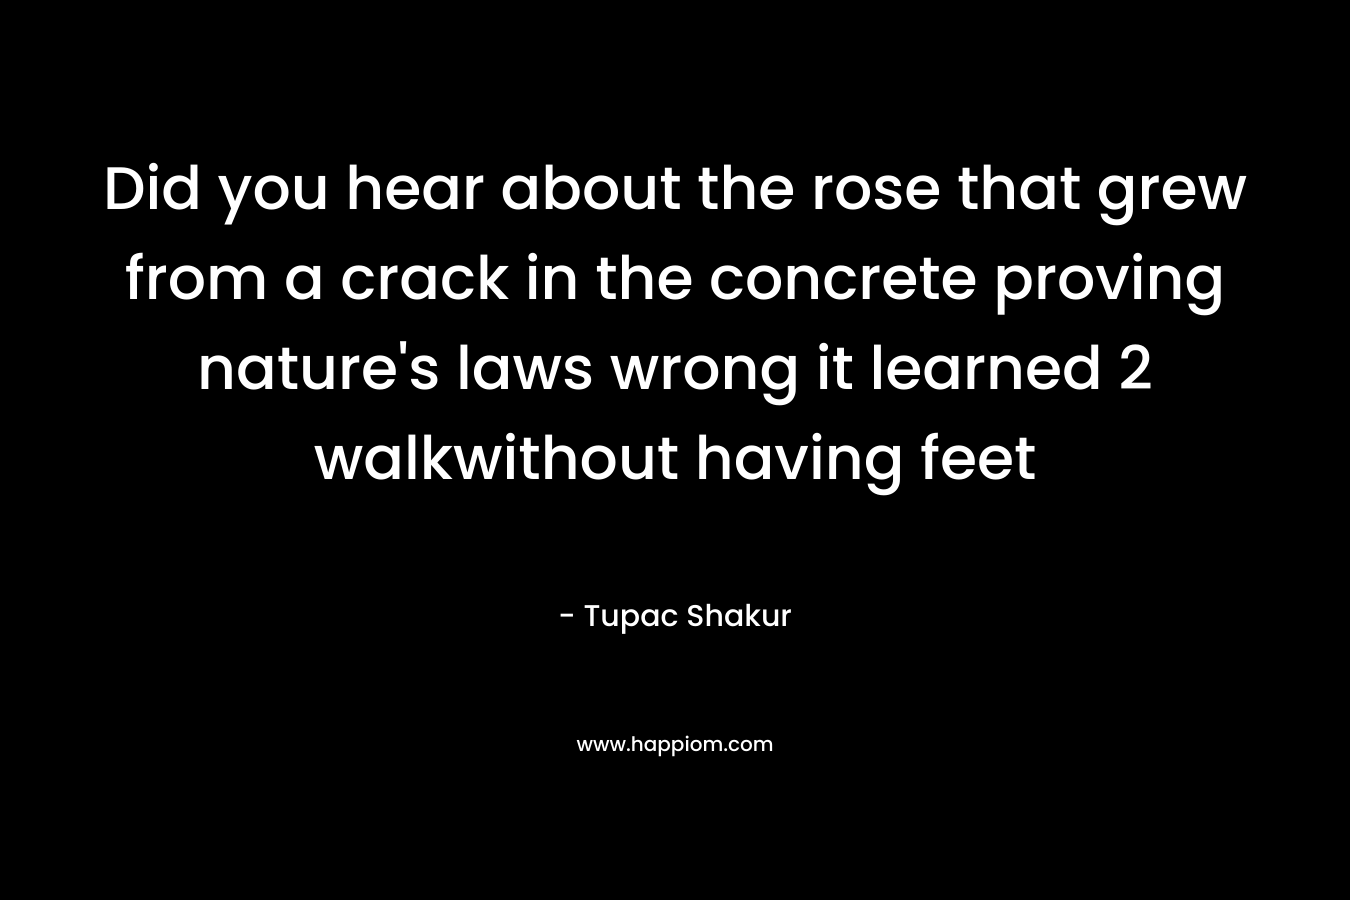 Did you hear about the rose that grew from a crack in the concrete proving nature's laws wrong it learned 2 walkwithout having feet